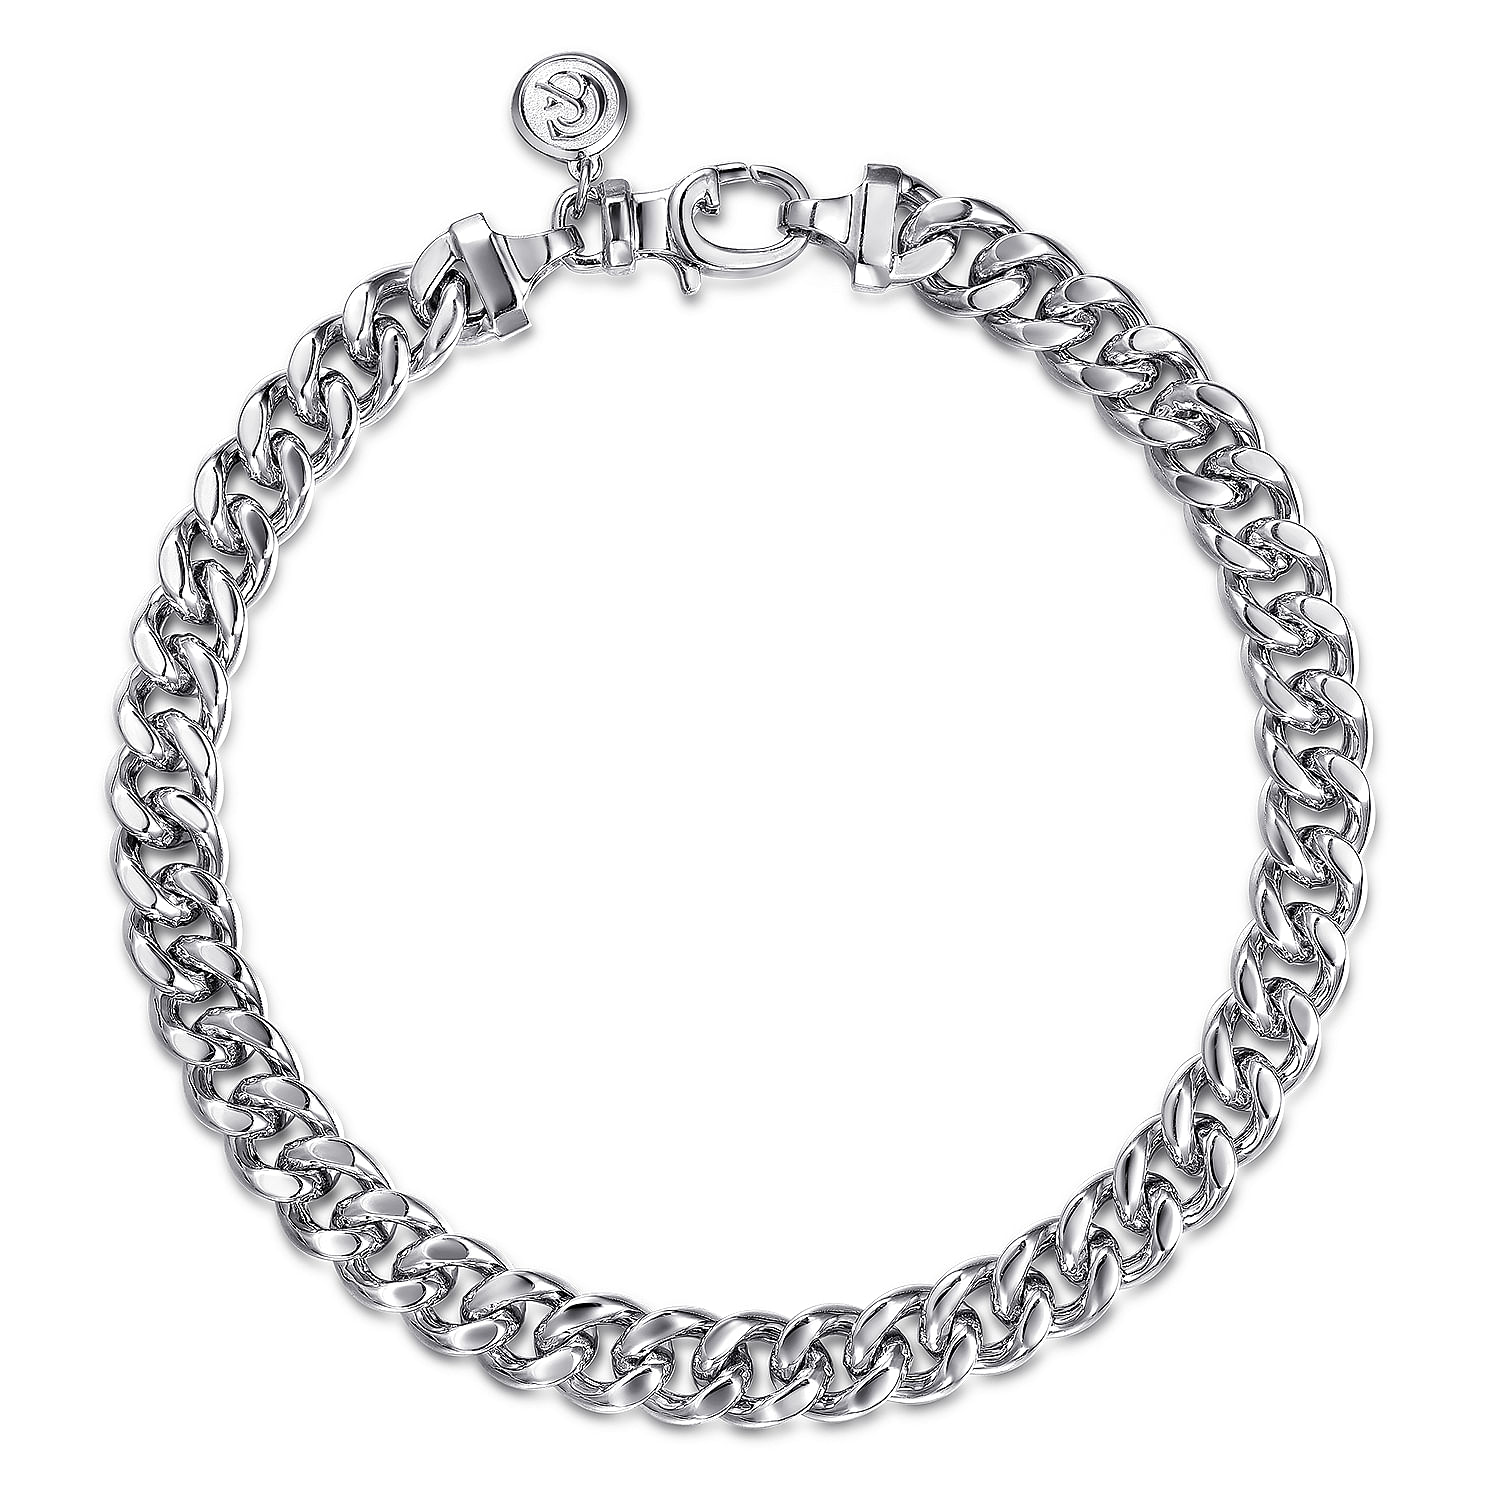 6.8mm 925 Sterling Silver Solid Mens Link Chain with Diamond Cut Bracelet